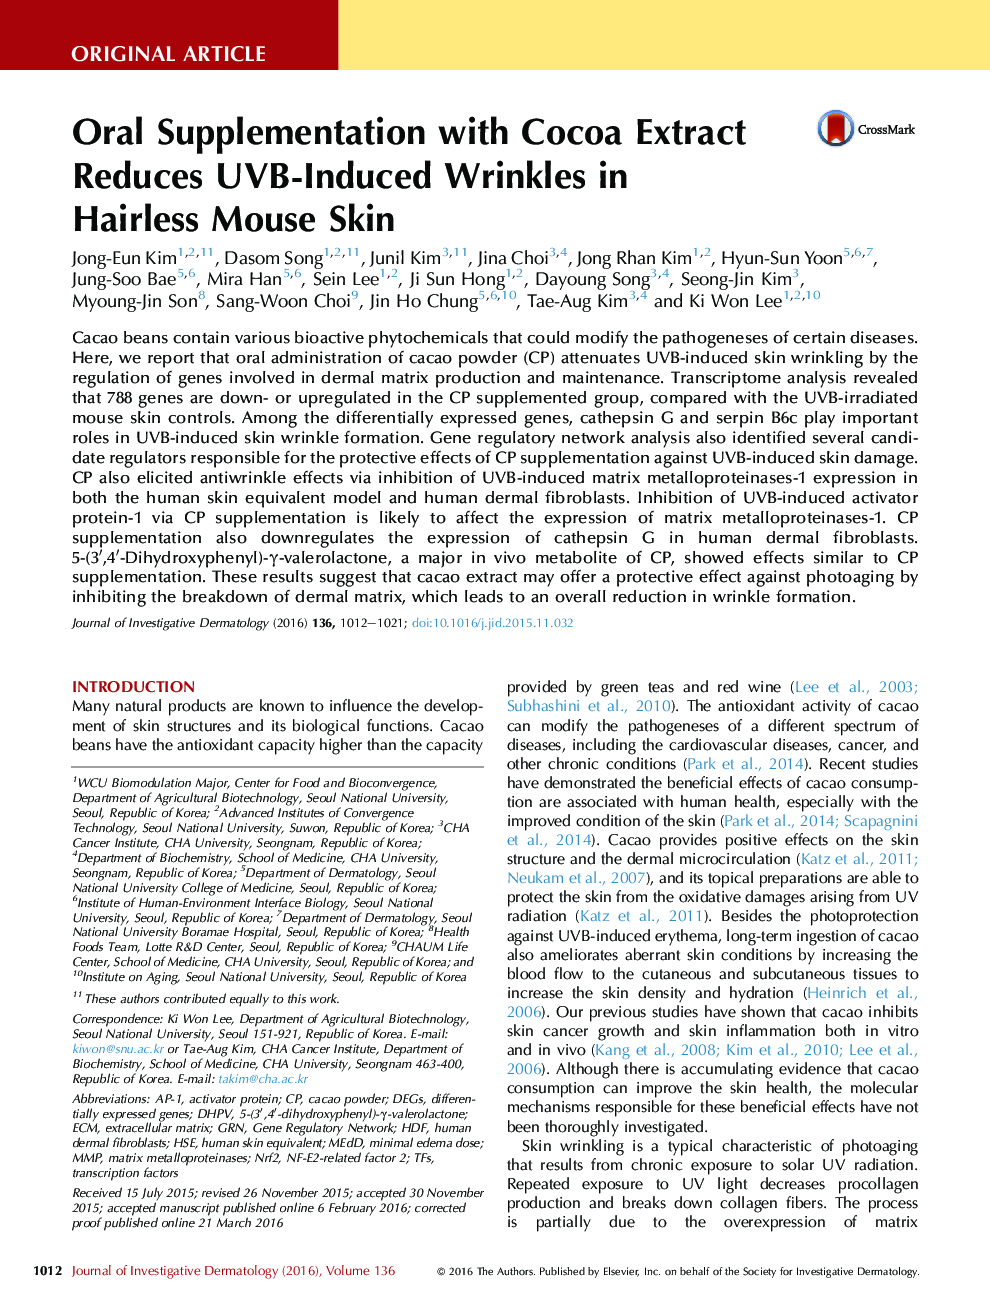 Original ArticlePhotobiologyOral Supplementation with Cocoa Extract Reduces UVB-Induced Wrinkles in HairlessÂ Mouse Skin